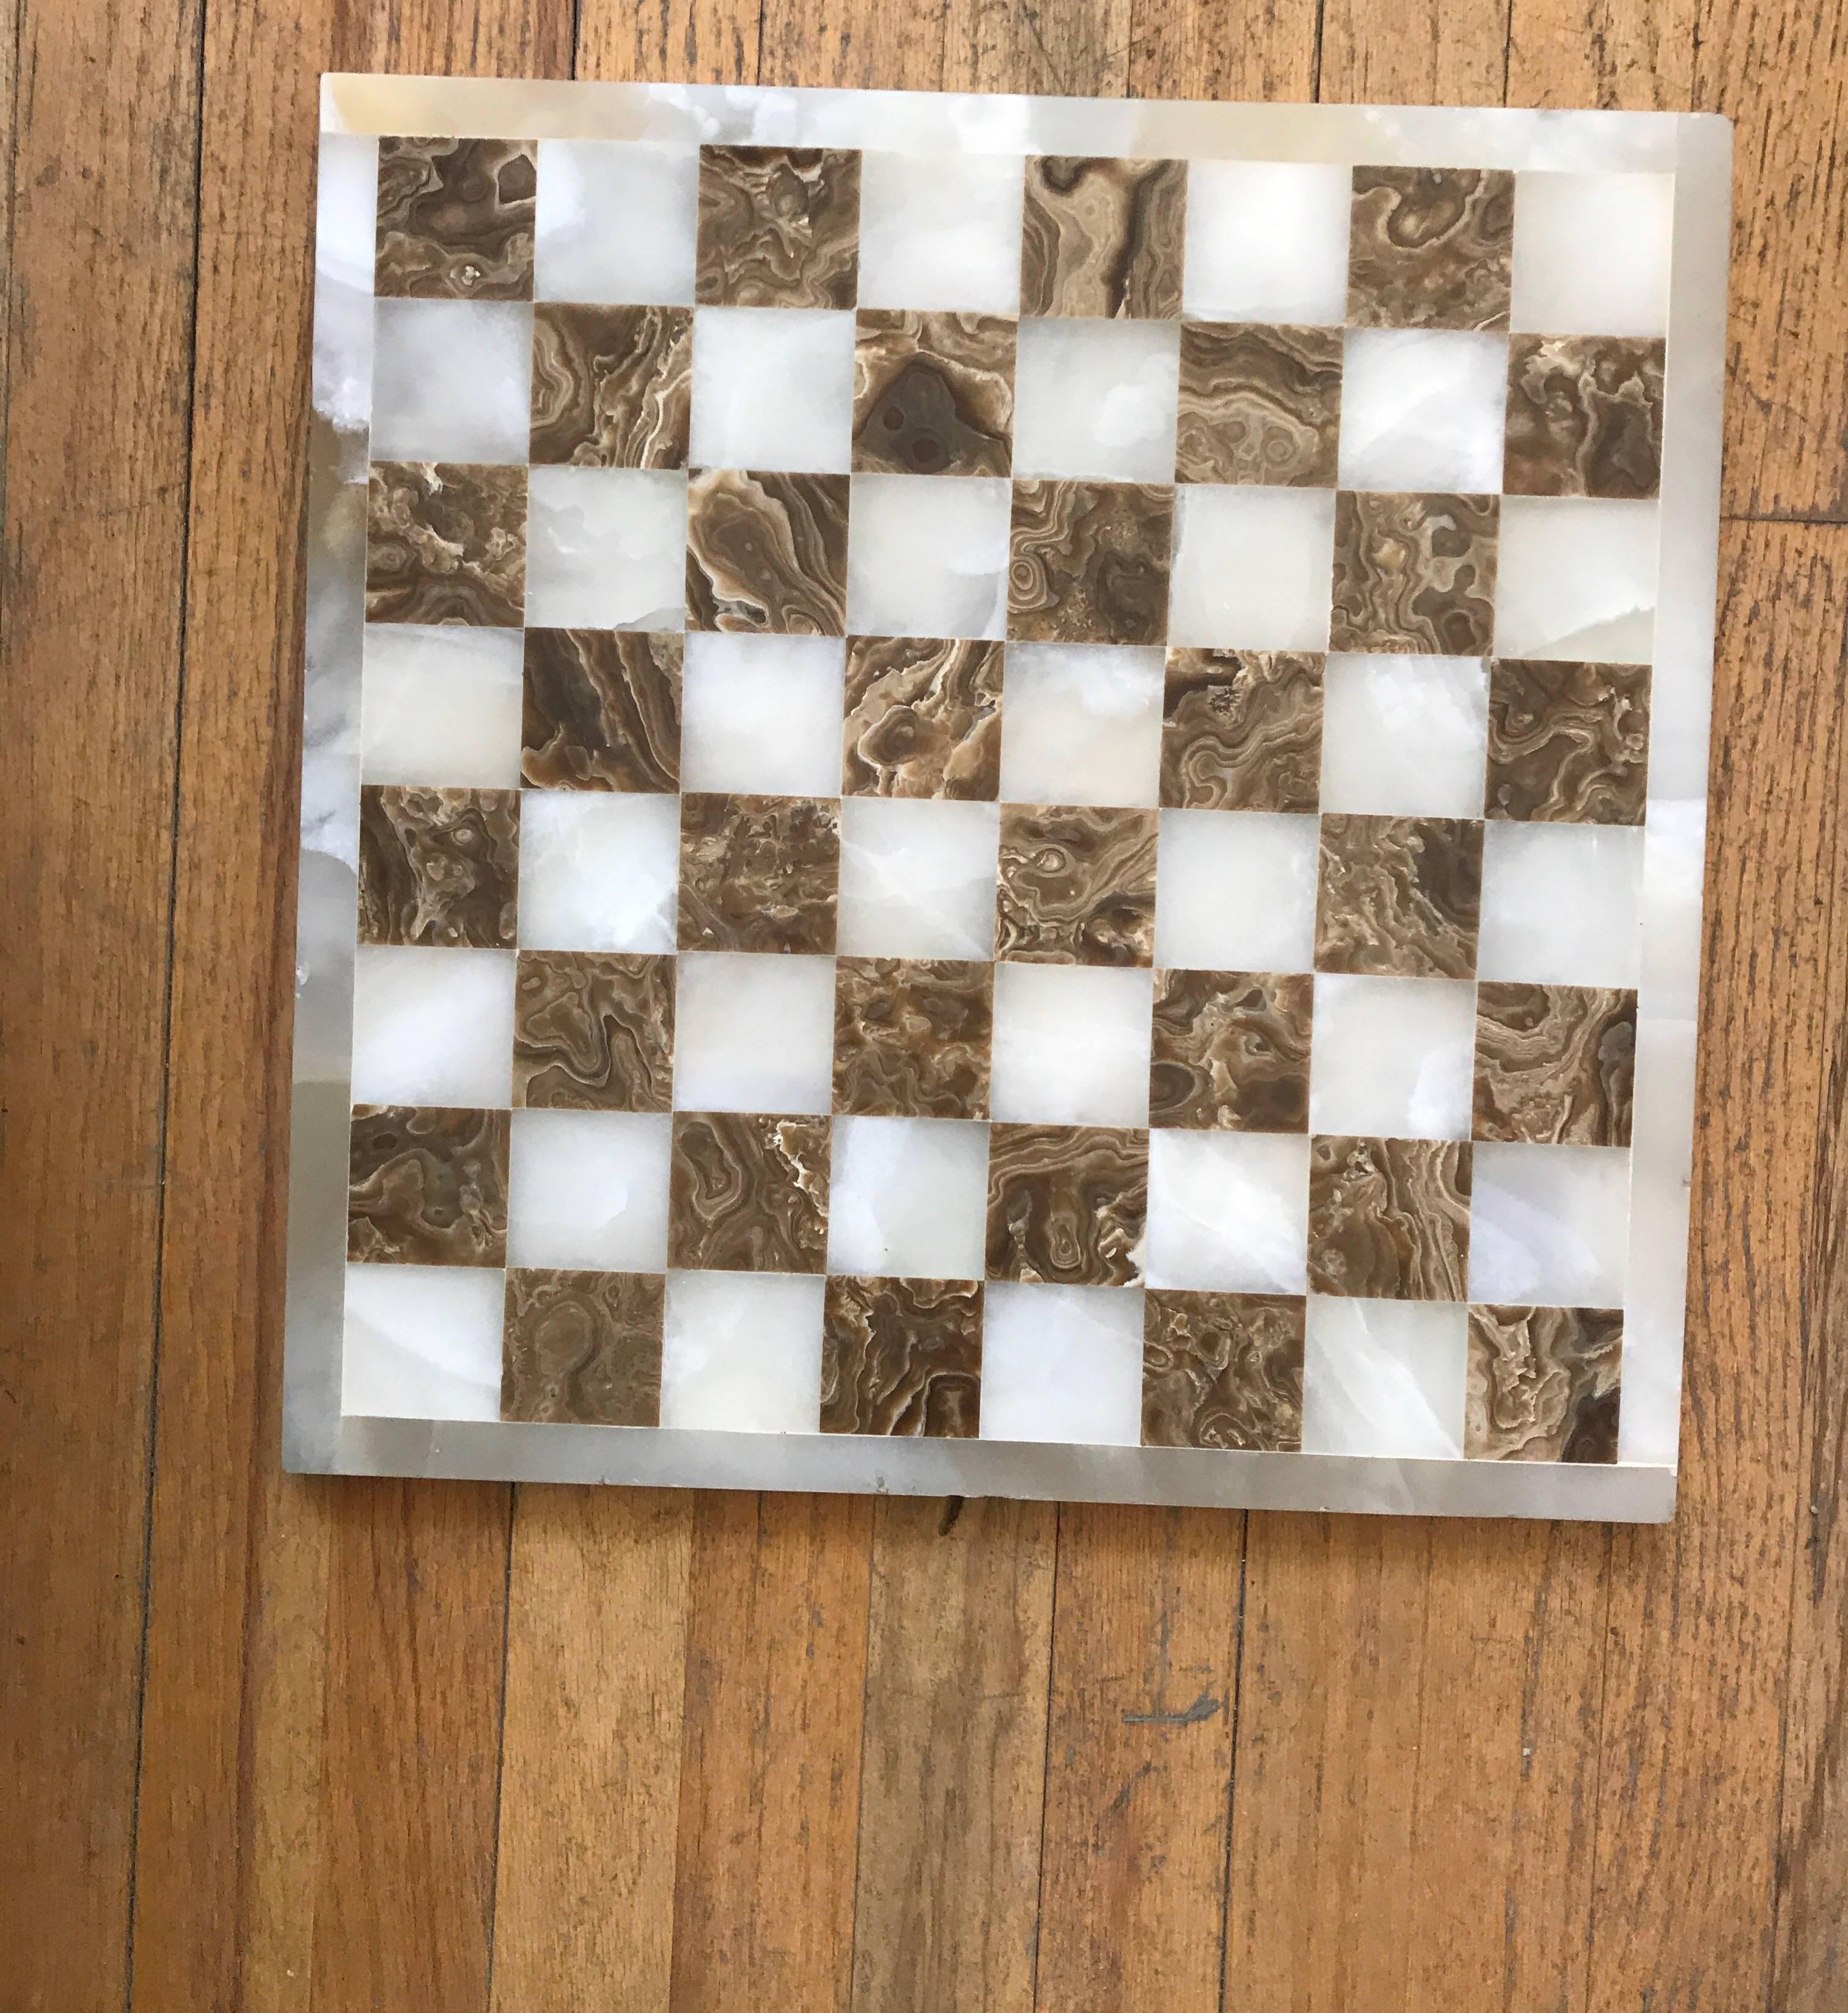 Hand-Crafted Onyx Game Board For Chess or Checkers